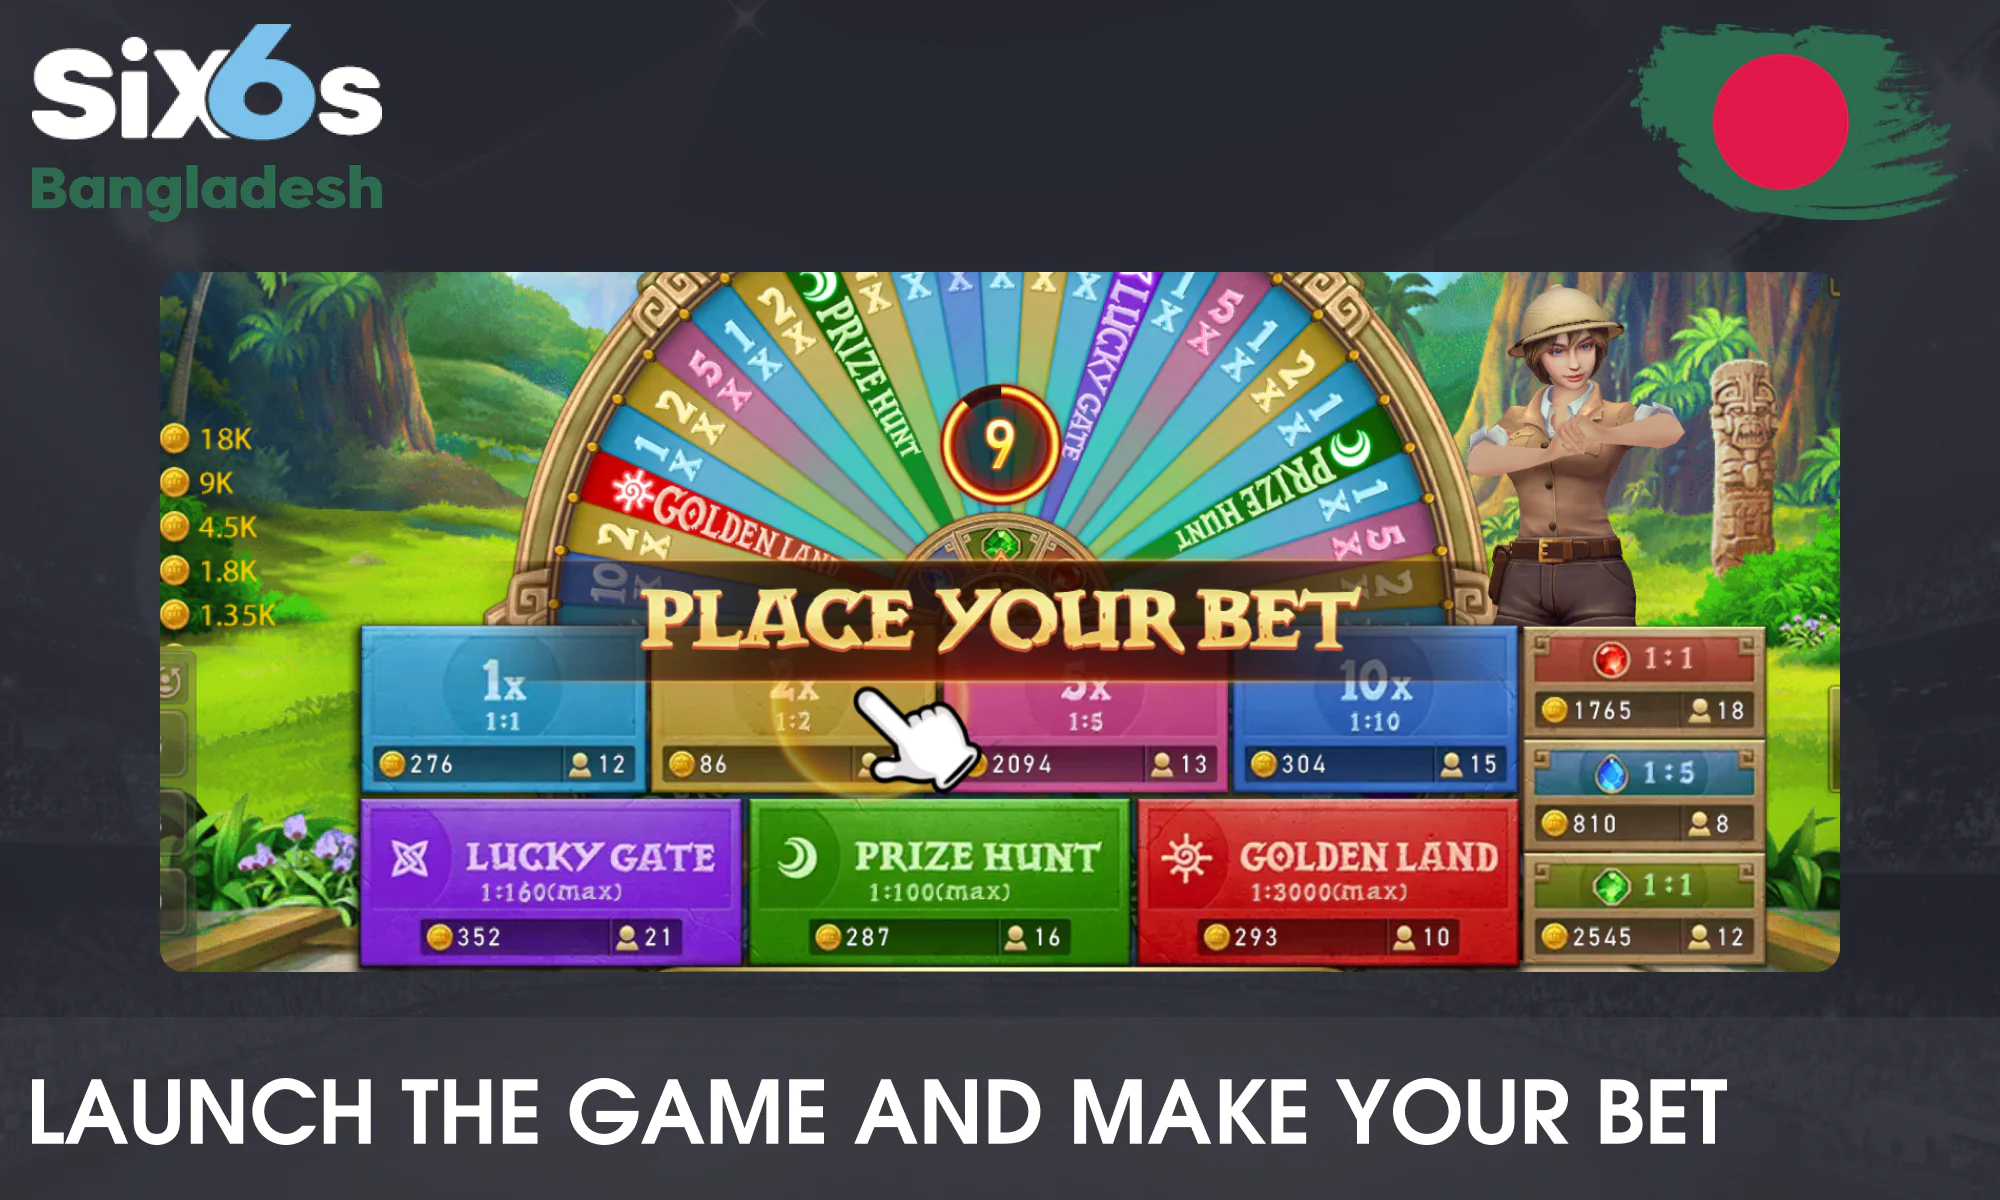 Launch the game and make your bet